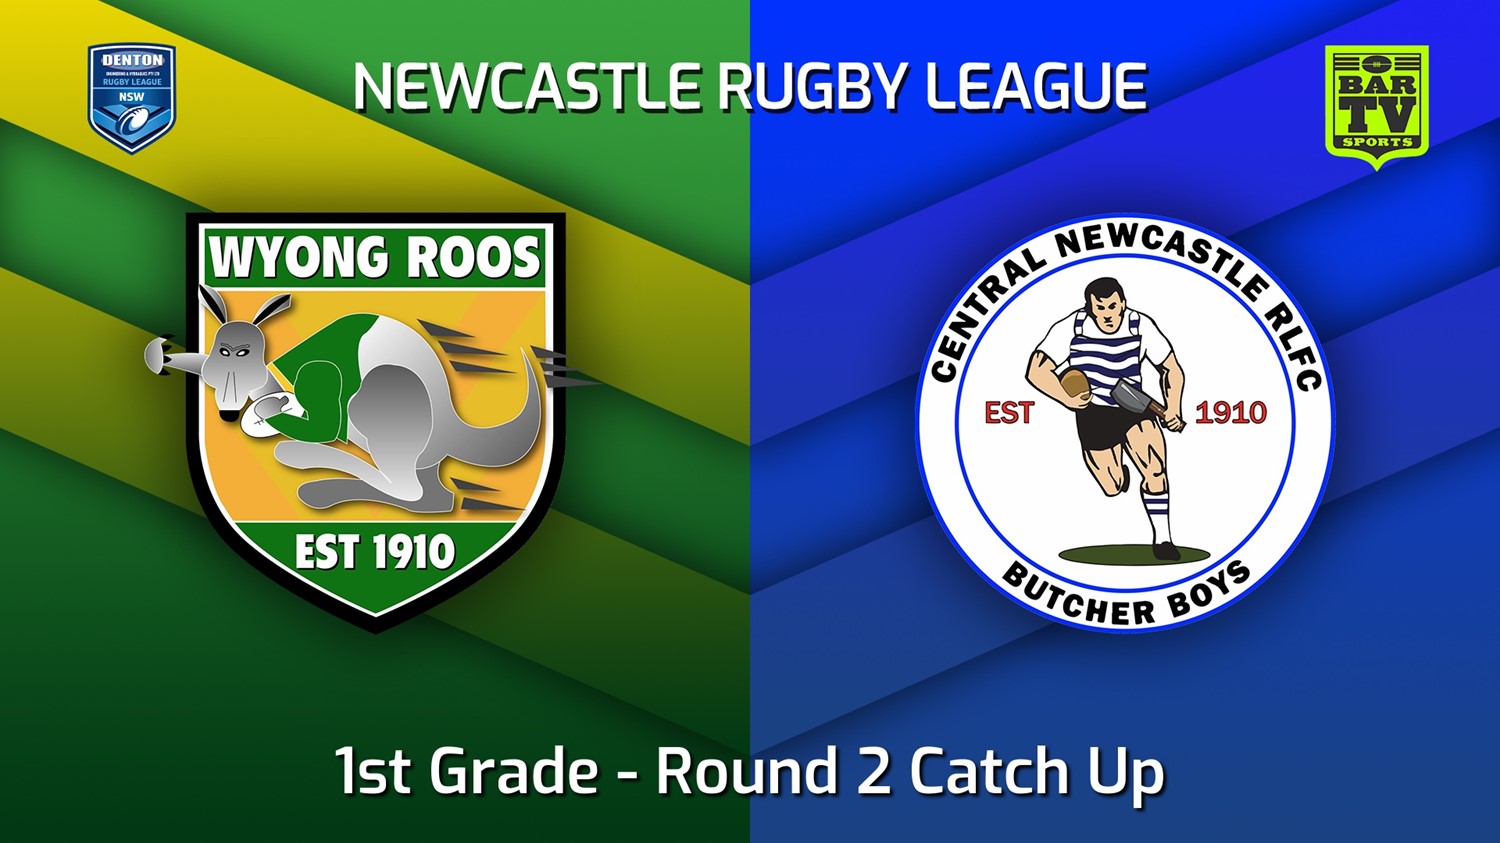 220515-Newcastle Round 2 Catch Up - 1st Grade - Wyong Roos v Central Newcastle Slate Image